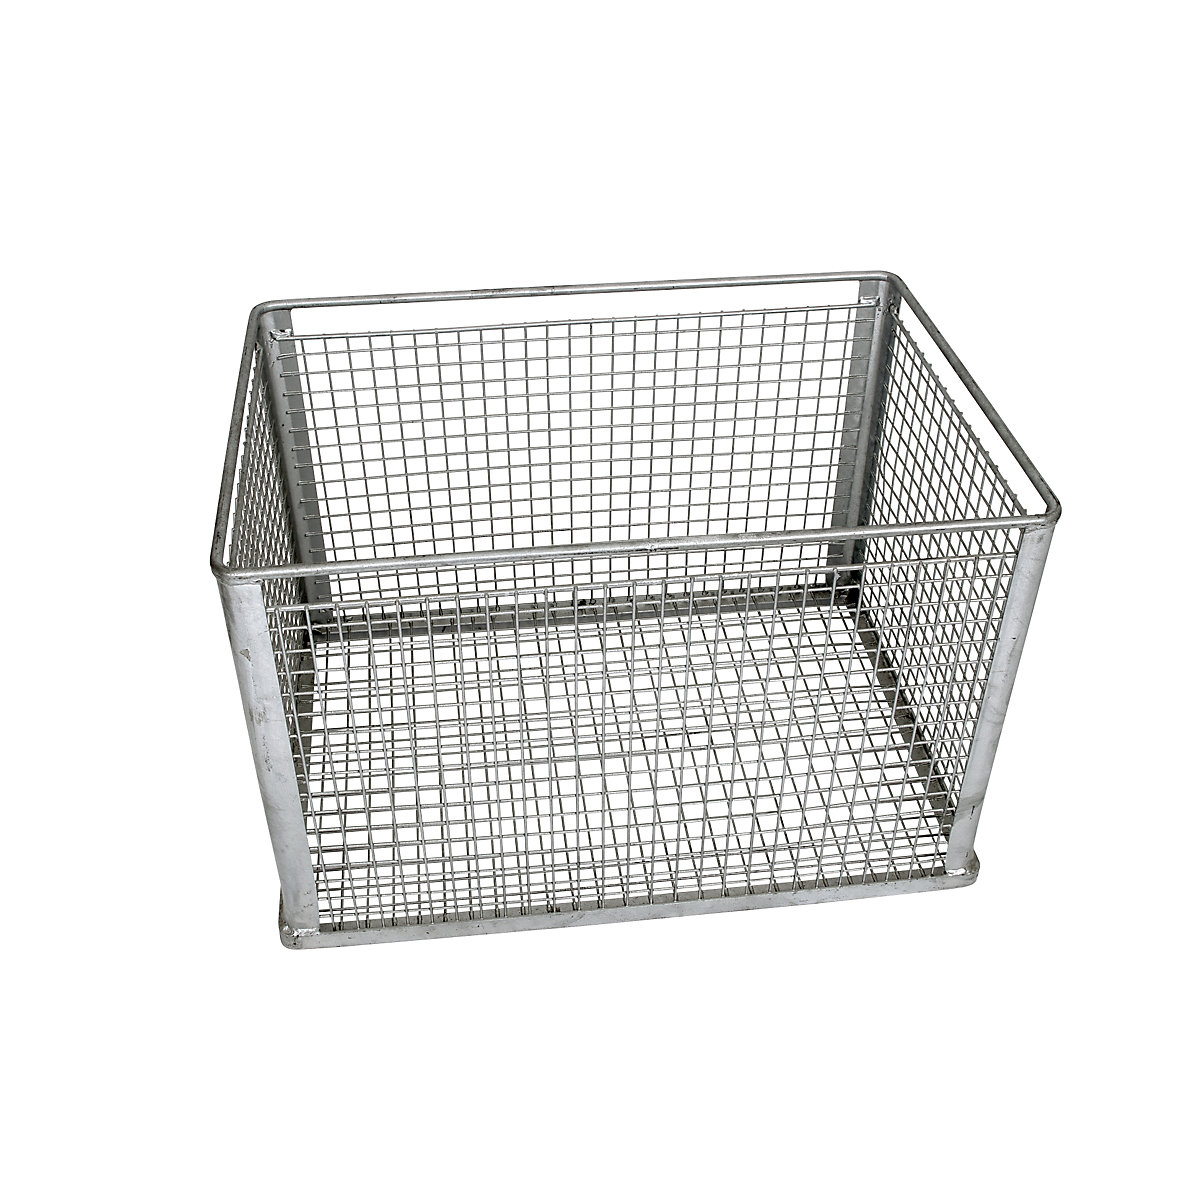 Stacking basket for heavy items, narrow mesh size, external dims. LxWxH 815 x 565 x 525 mm-8